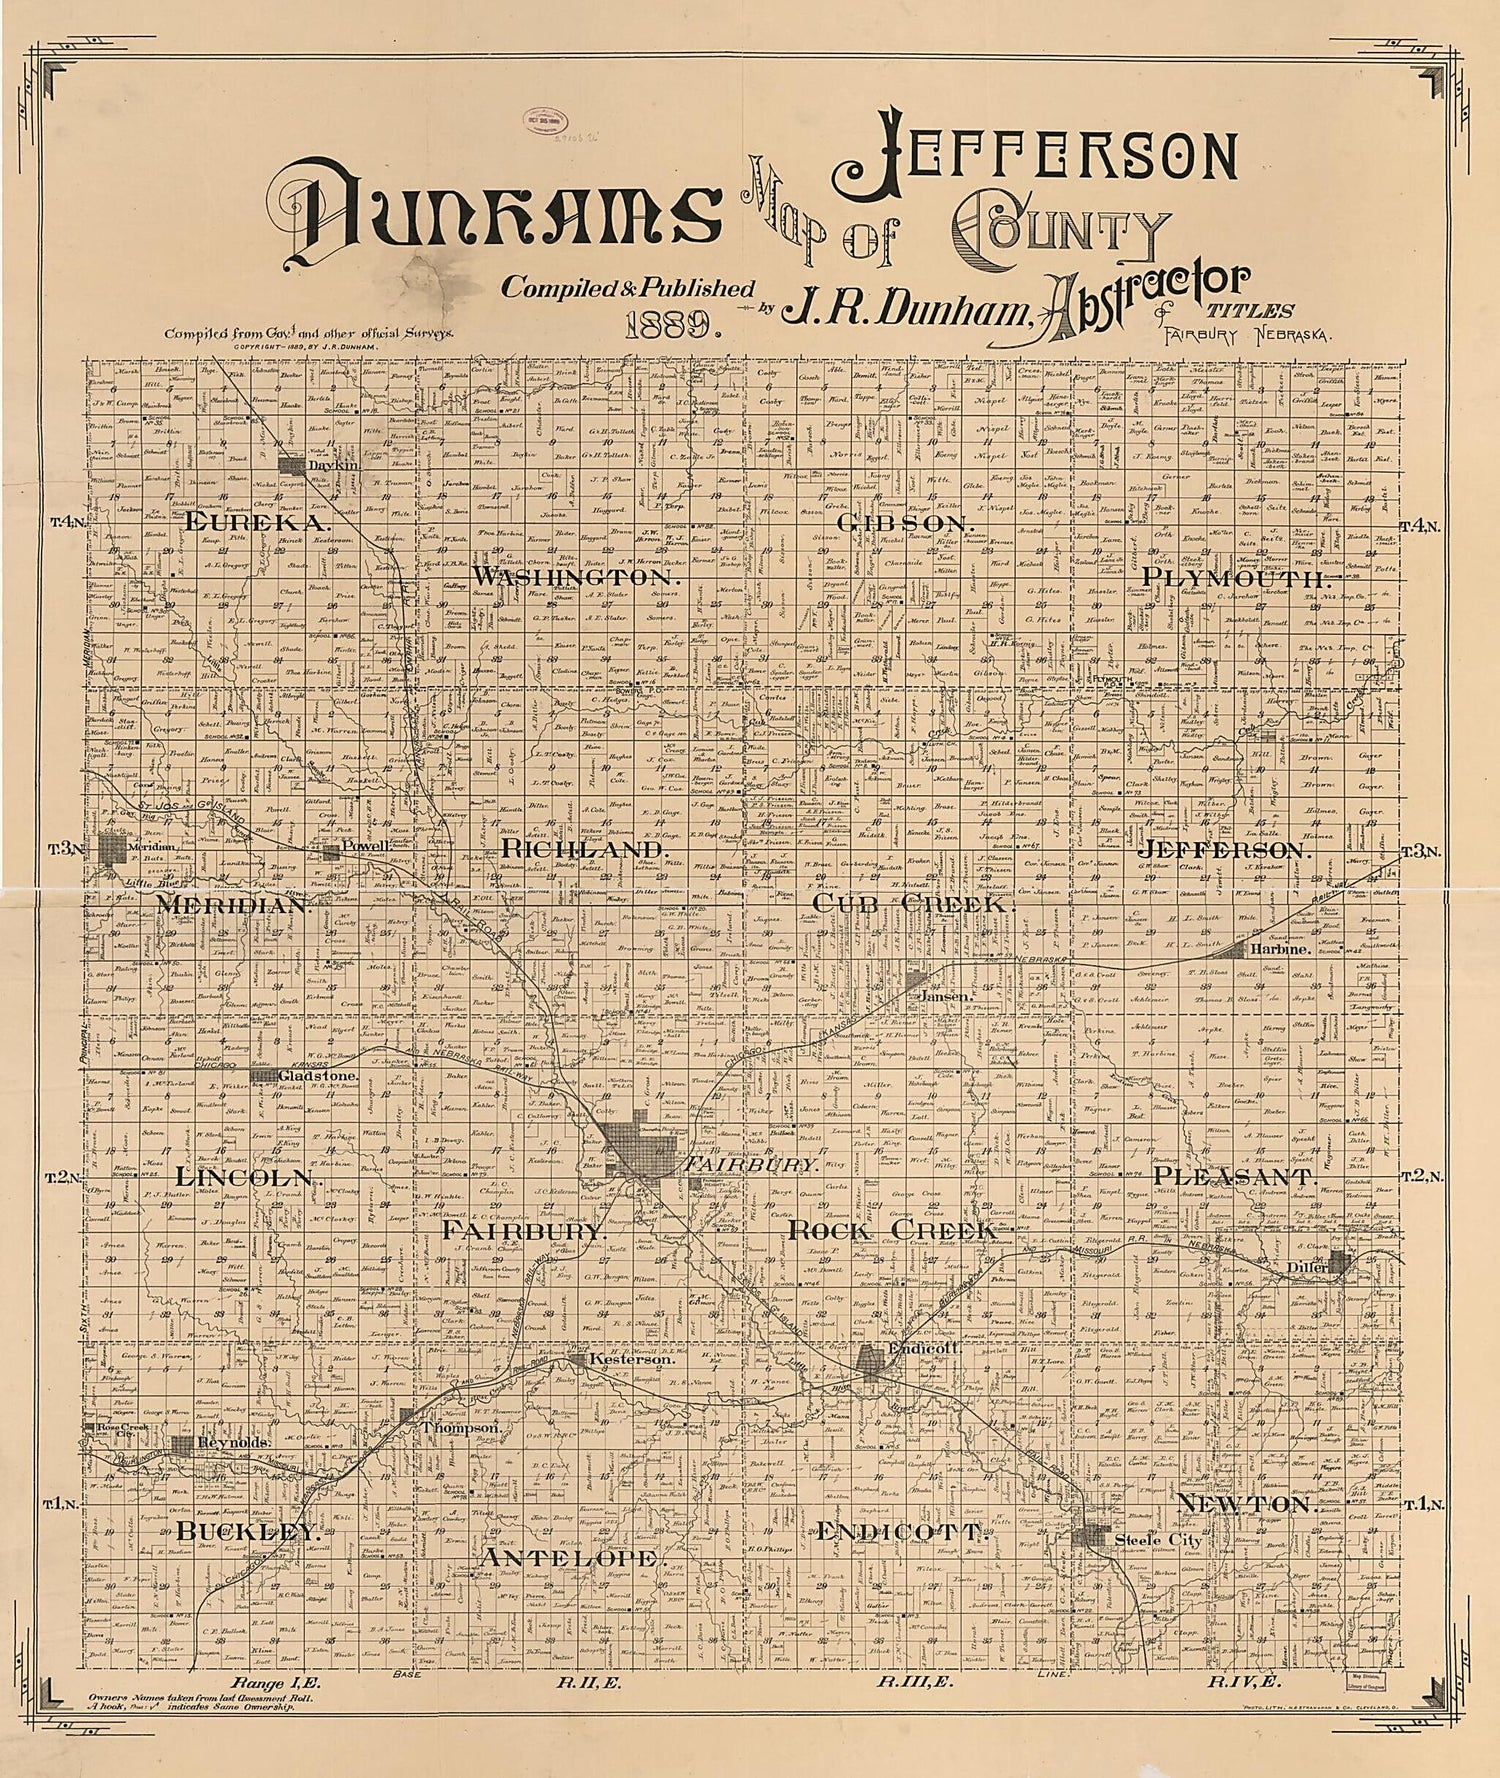 This old map of Dunham&